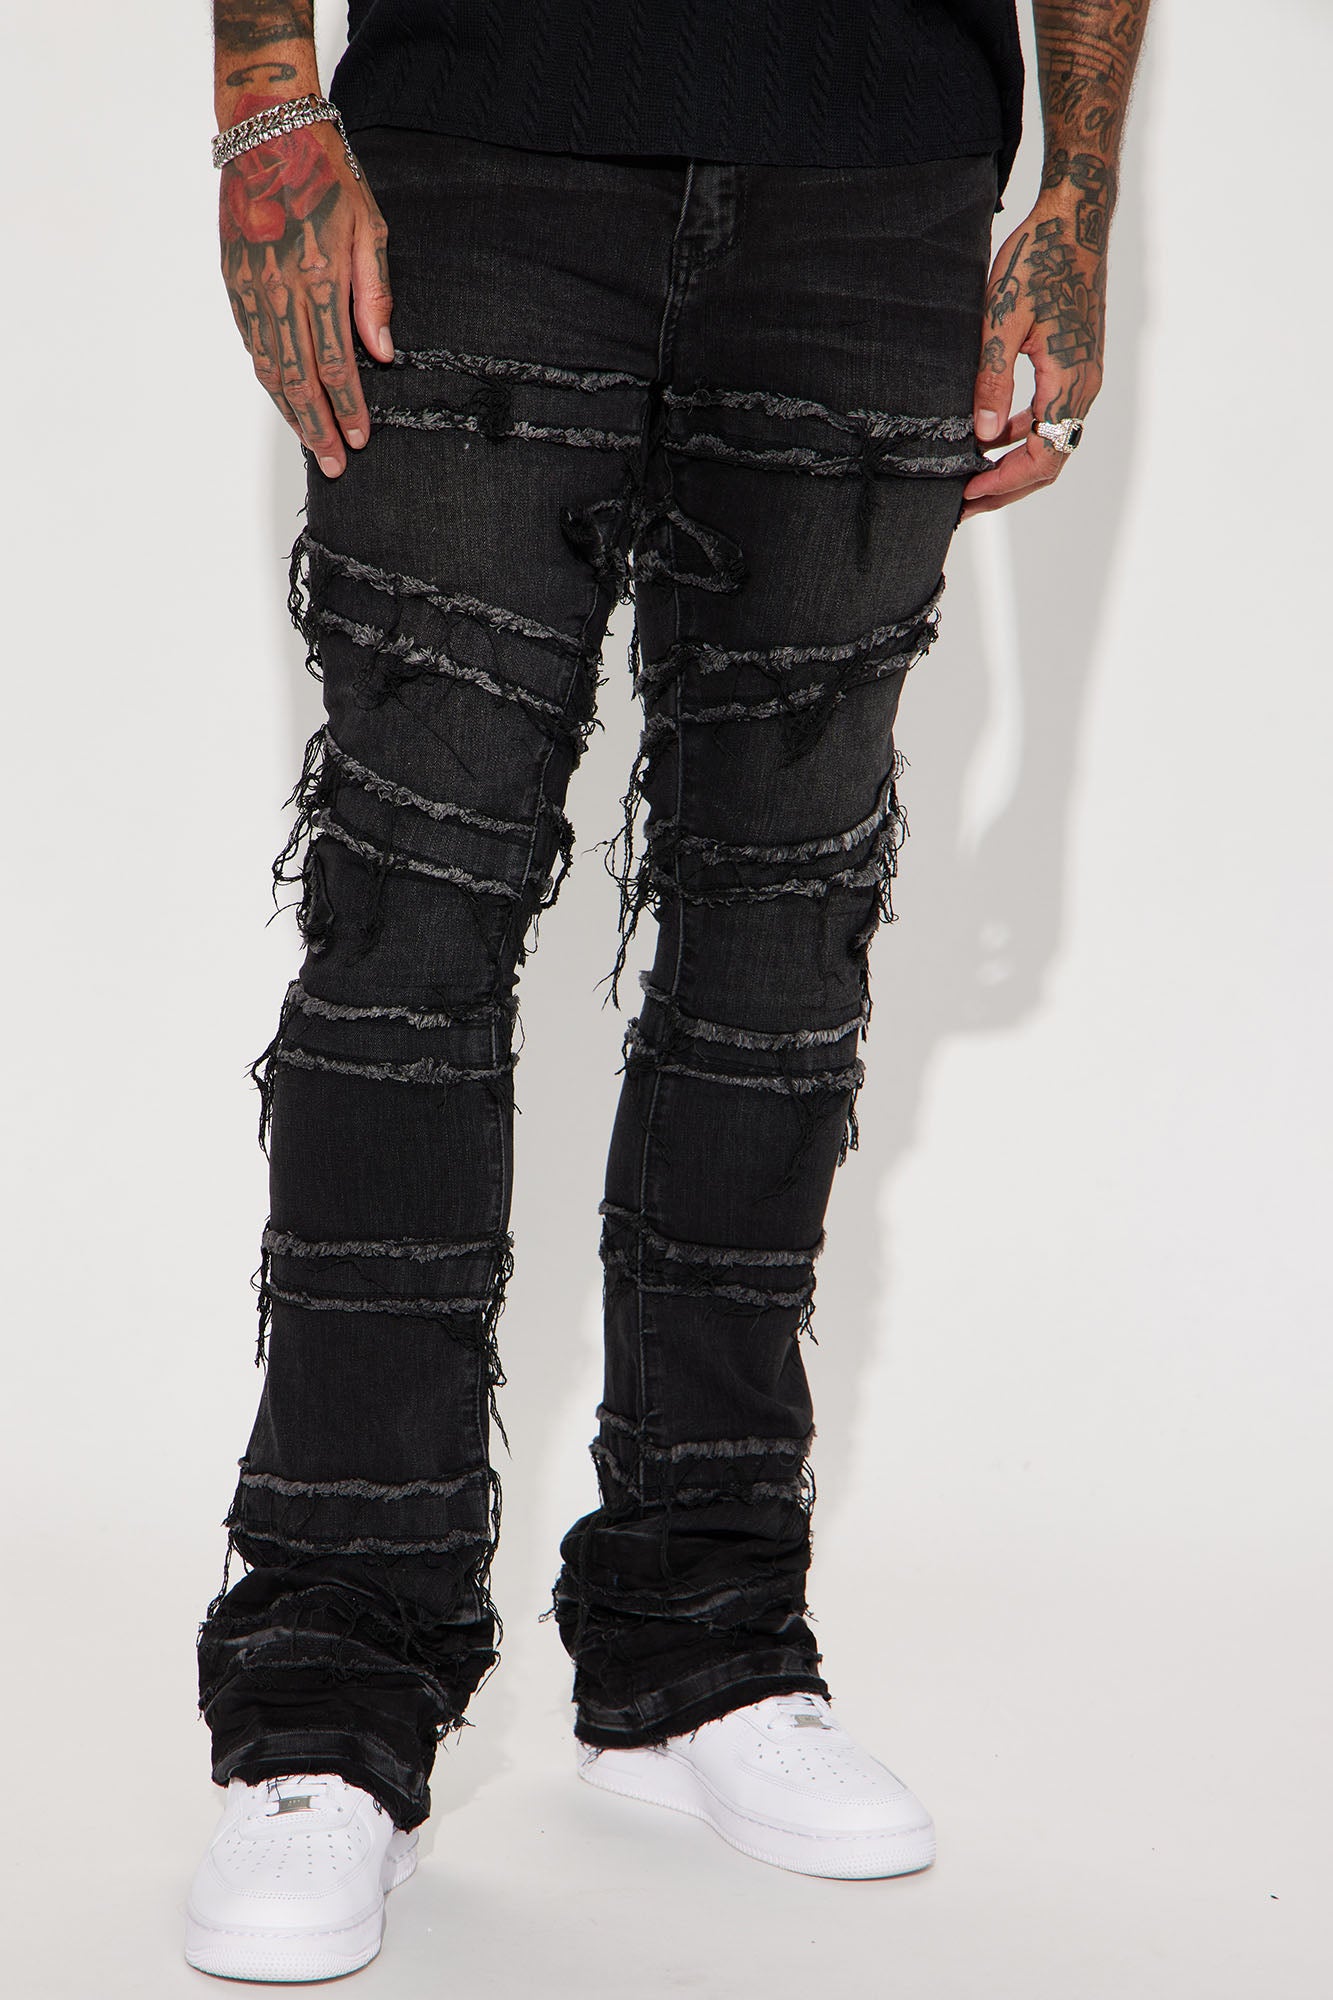 About Fray Stacked Skinny Flare Jeans - Black Wash